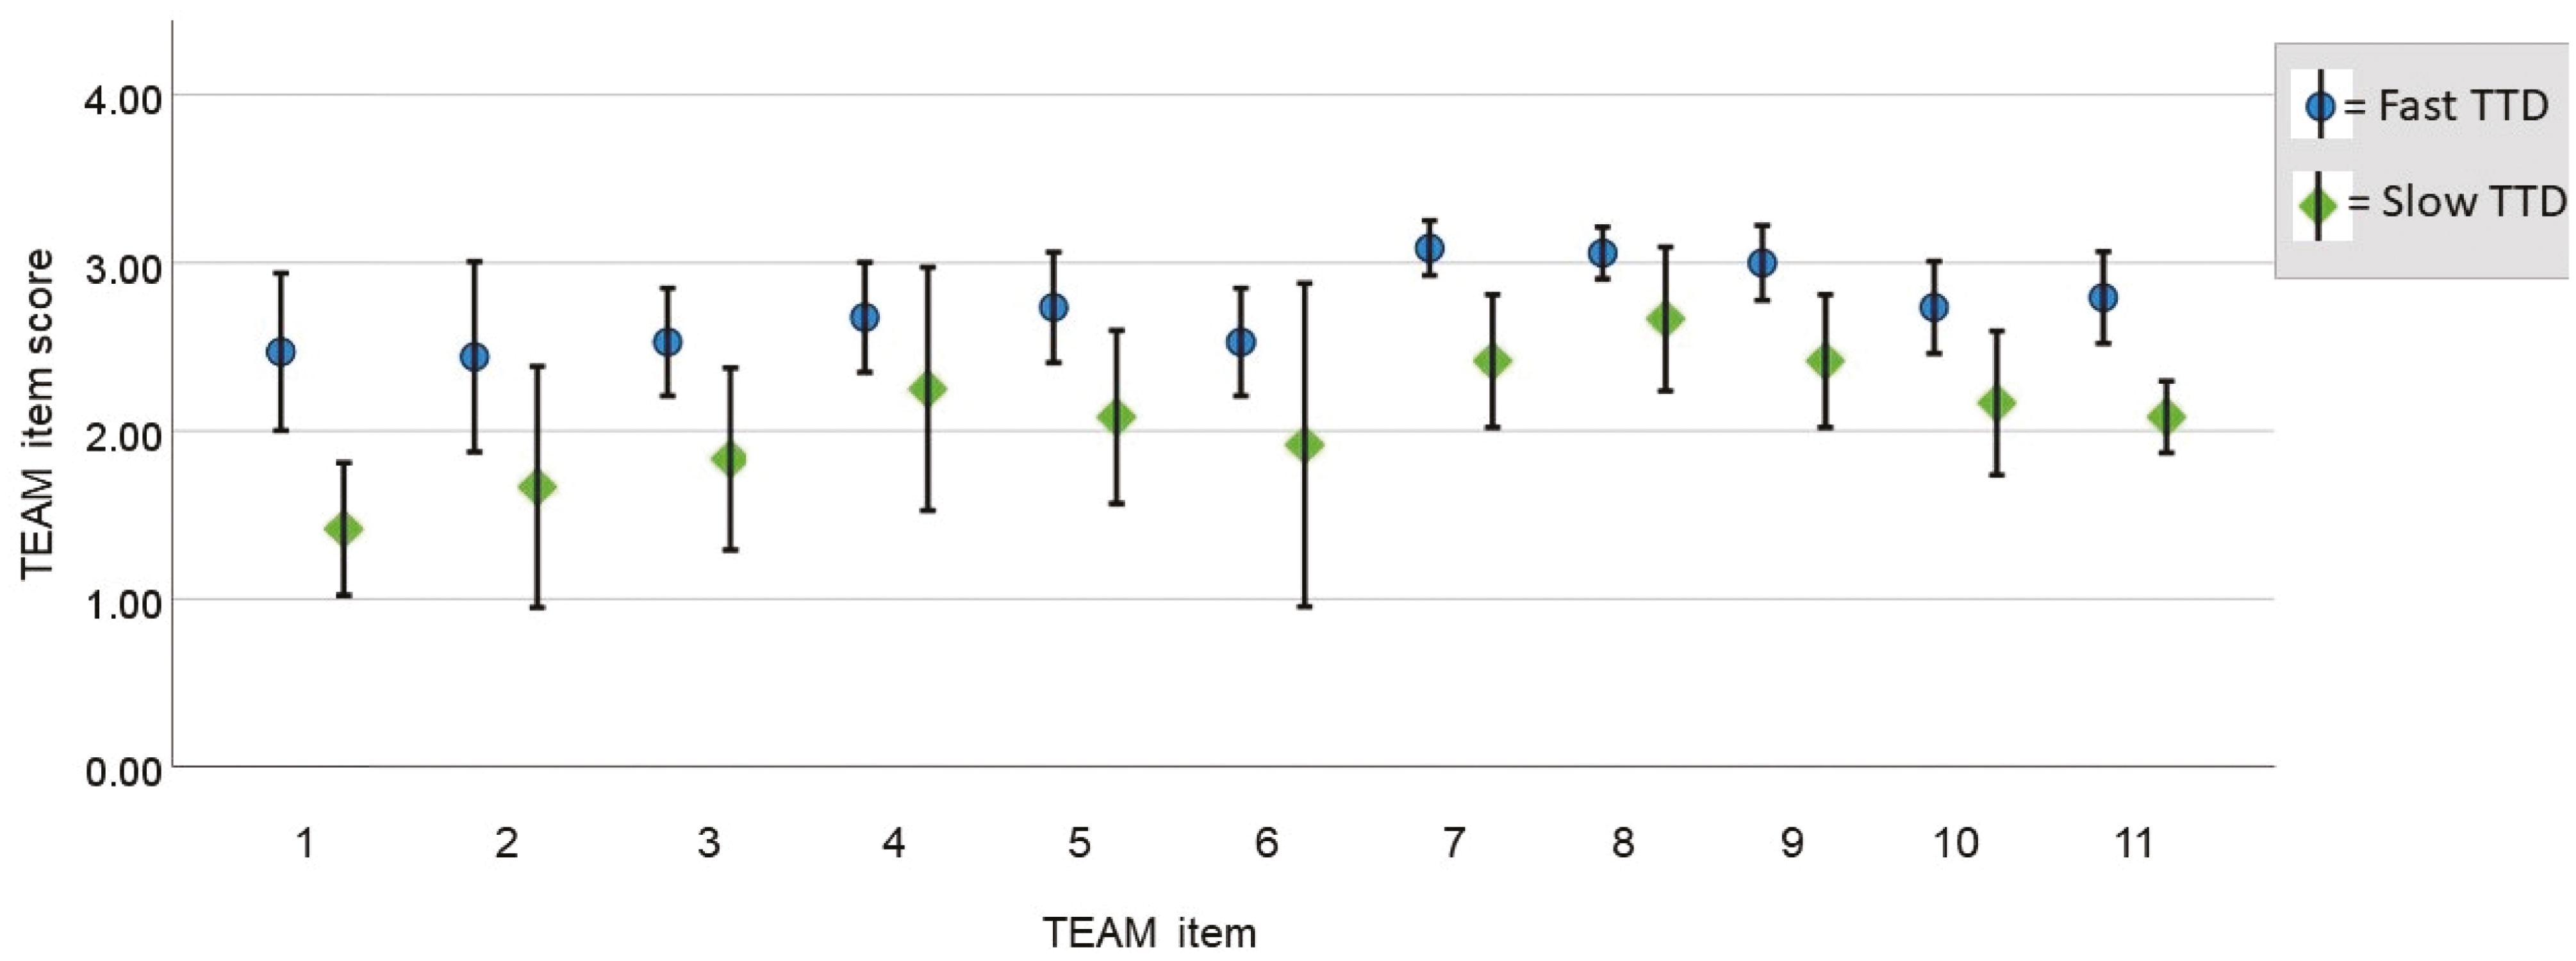 Means and 95% confidence intervals for individual TEAM item scores for the fast versus slow time-to-defibrillation groups.